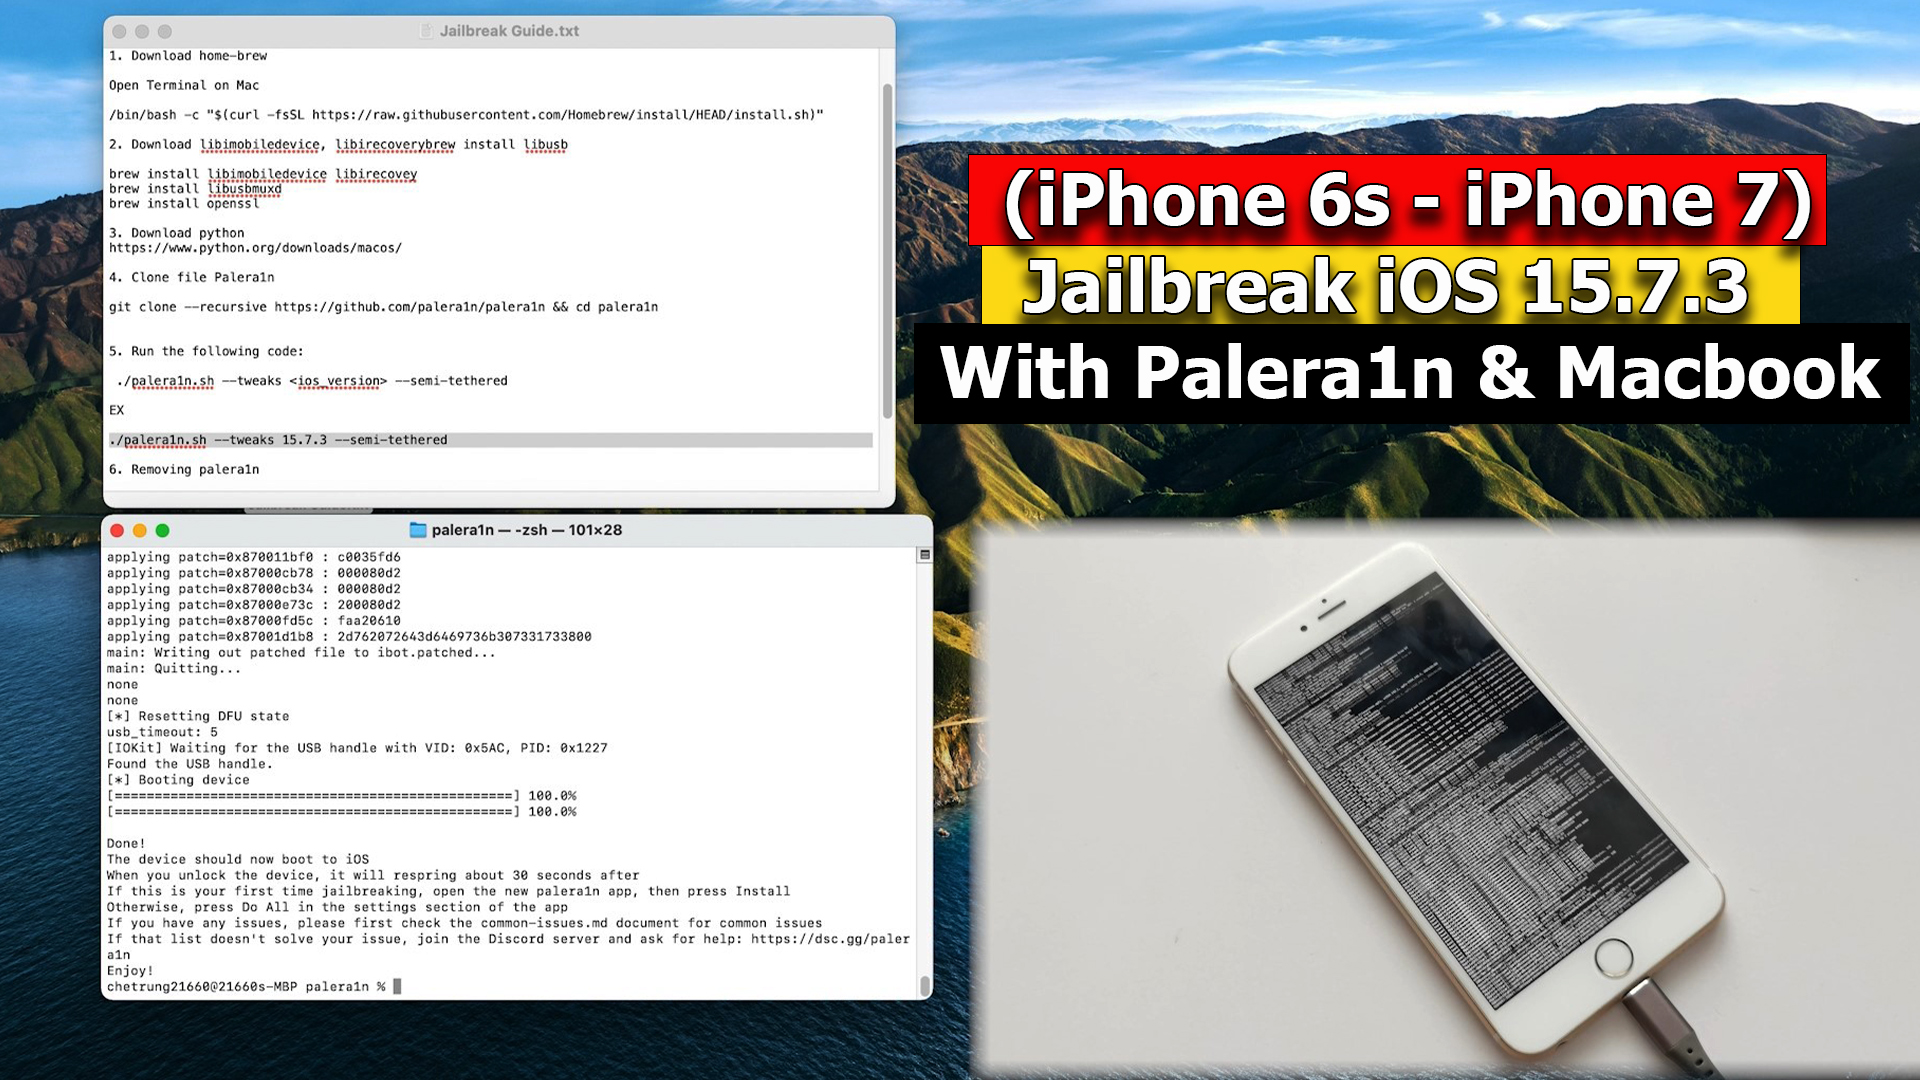 TIME OUT IPHONE 7 İOS 15.7.3 JAILBREAK · Issue #2347 · checkra1n/BugTracker  · GitHub